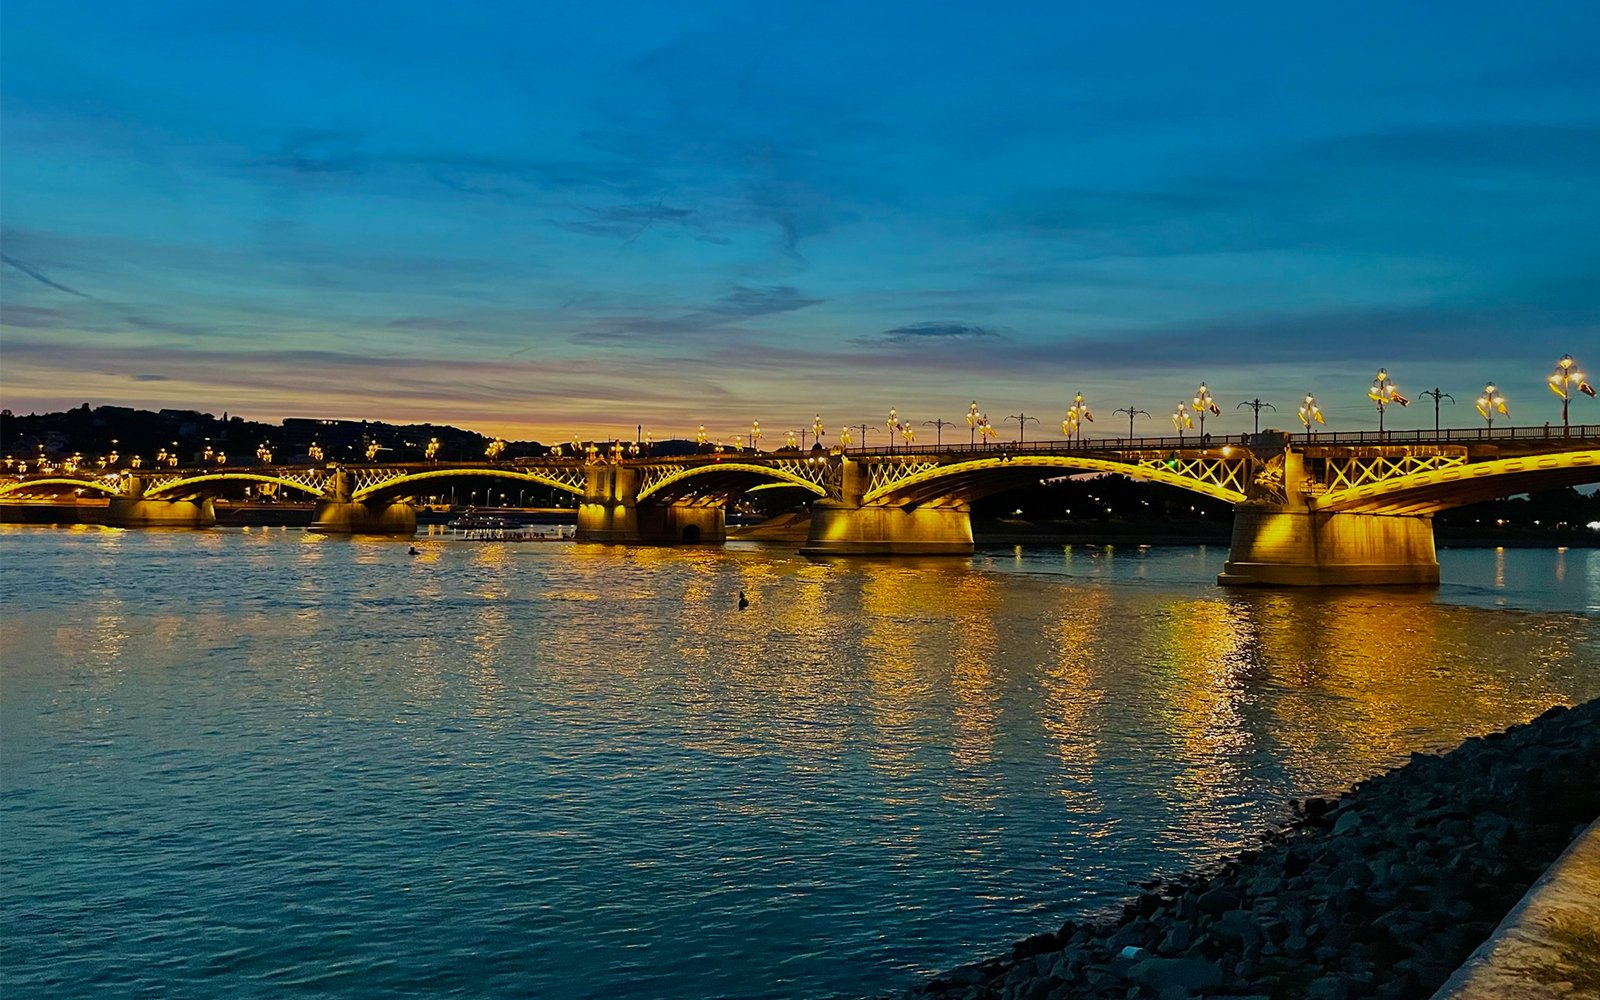 Bridge over large body of water at dusk, with bright yellow lights that are visible in reflection